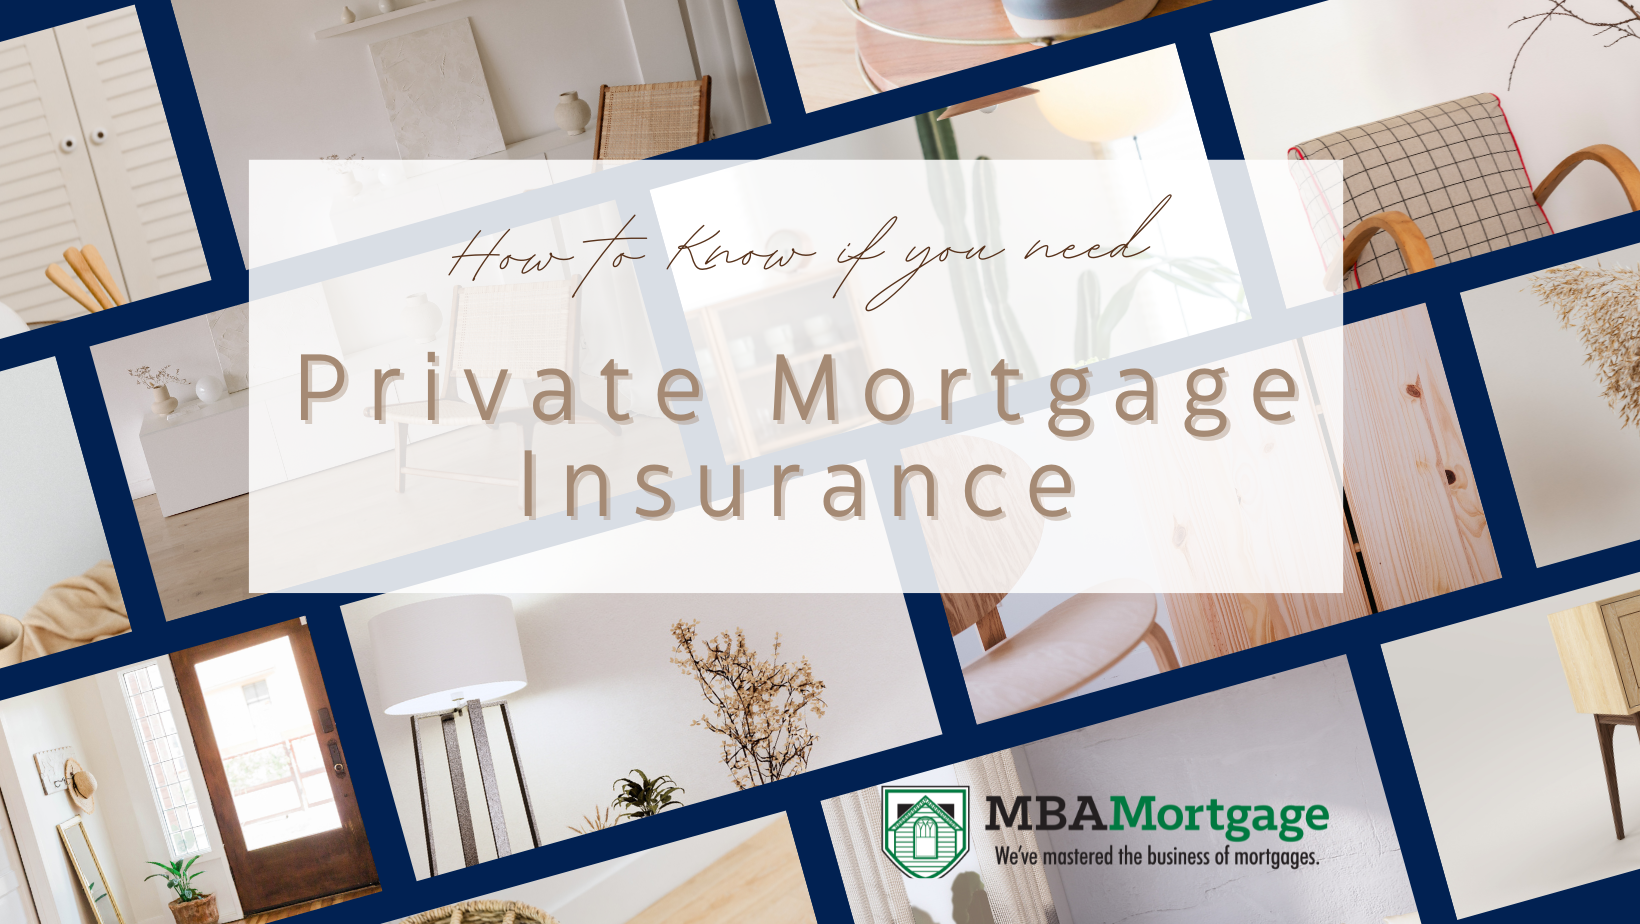 Need Private Mortgage Insurance